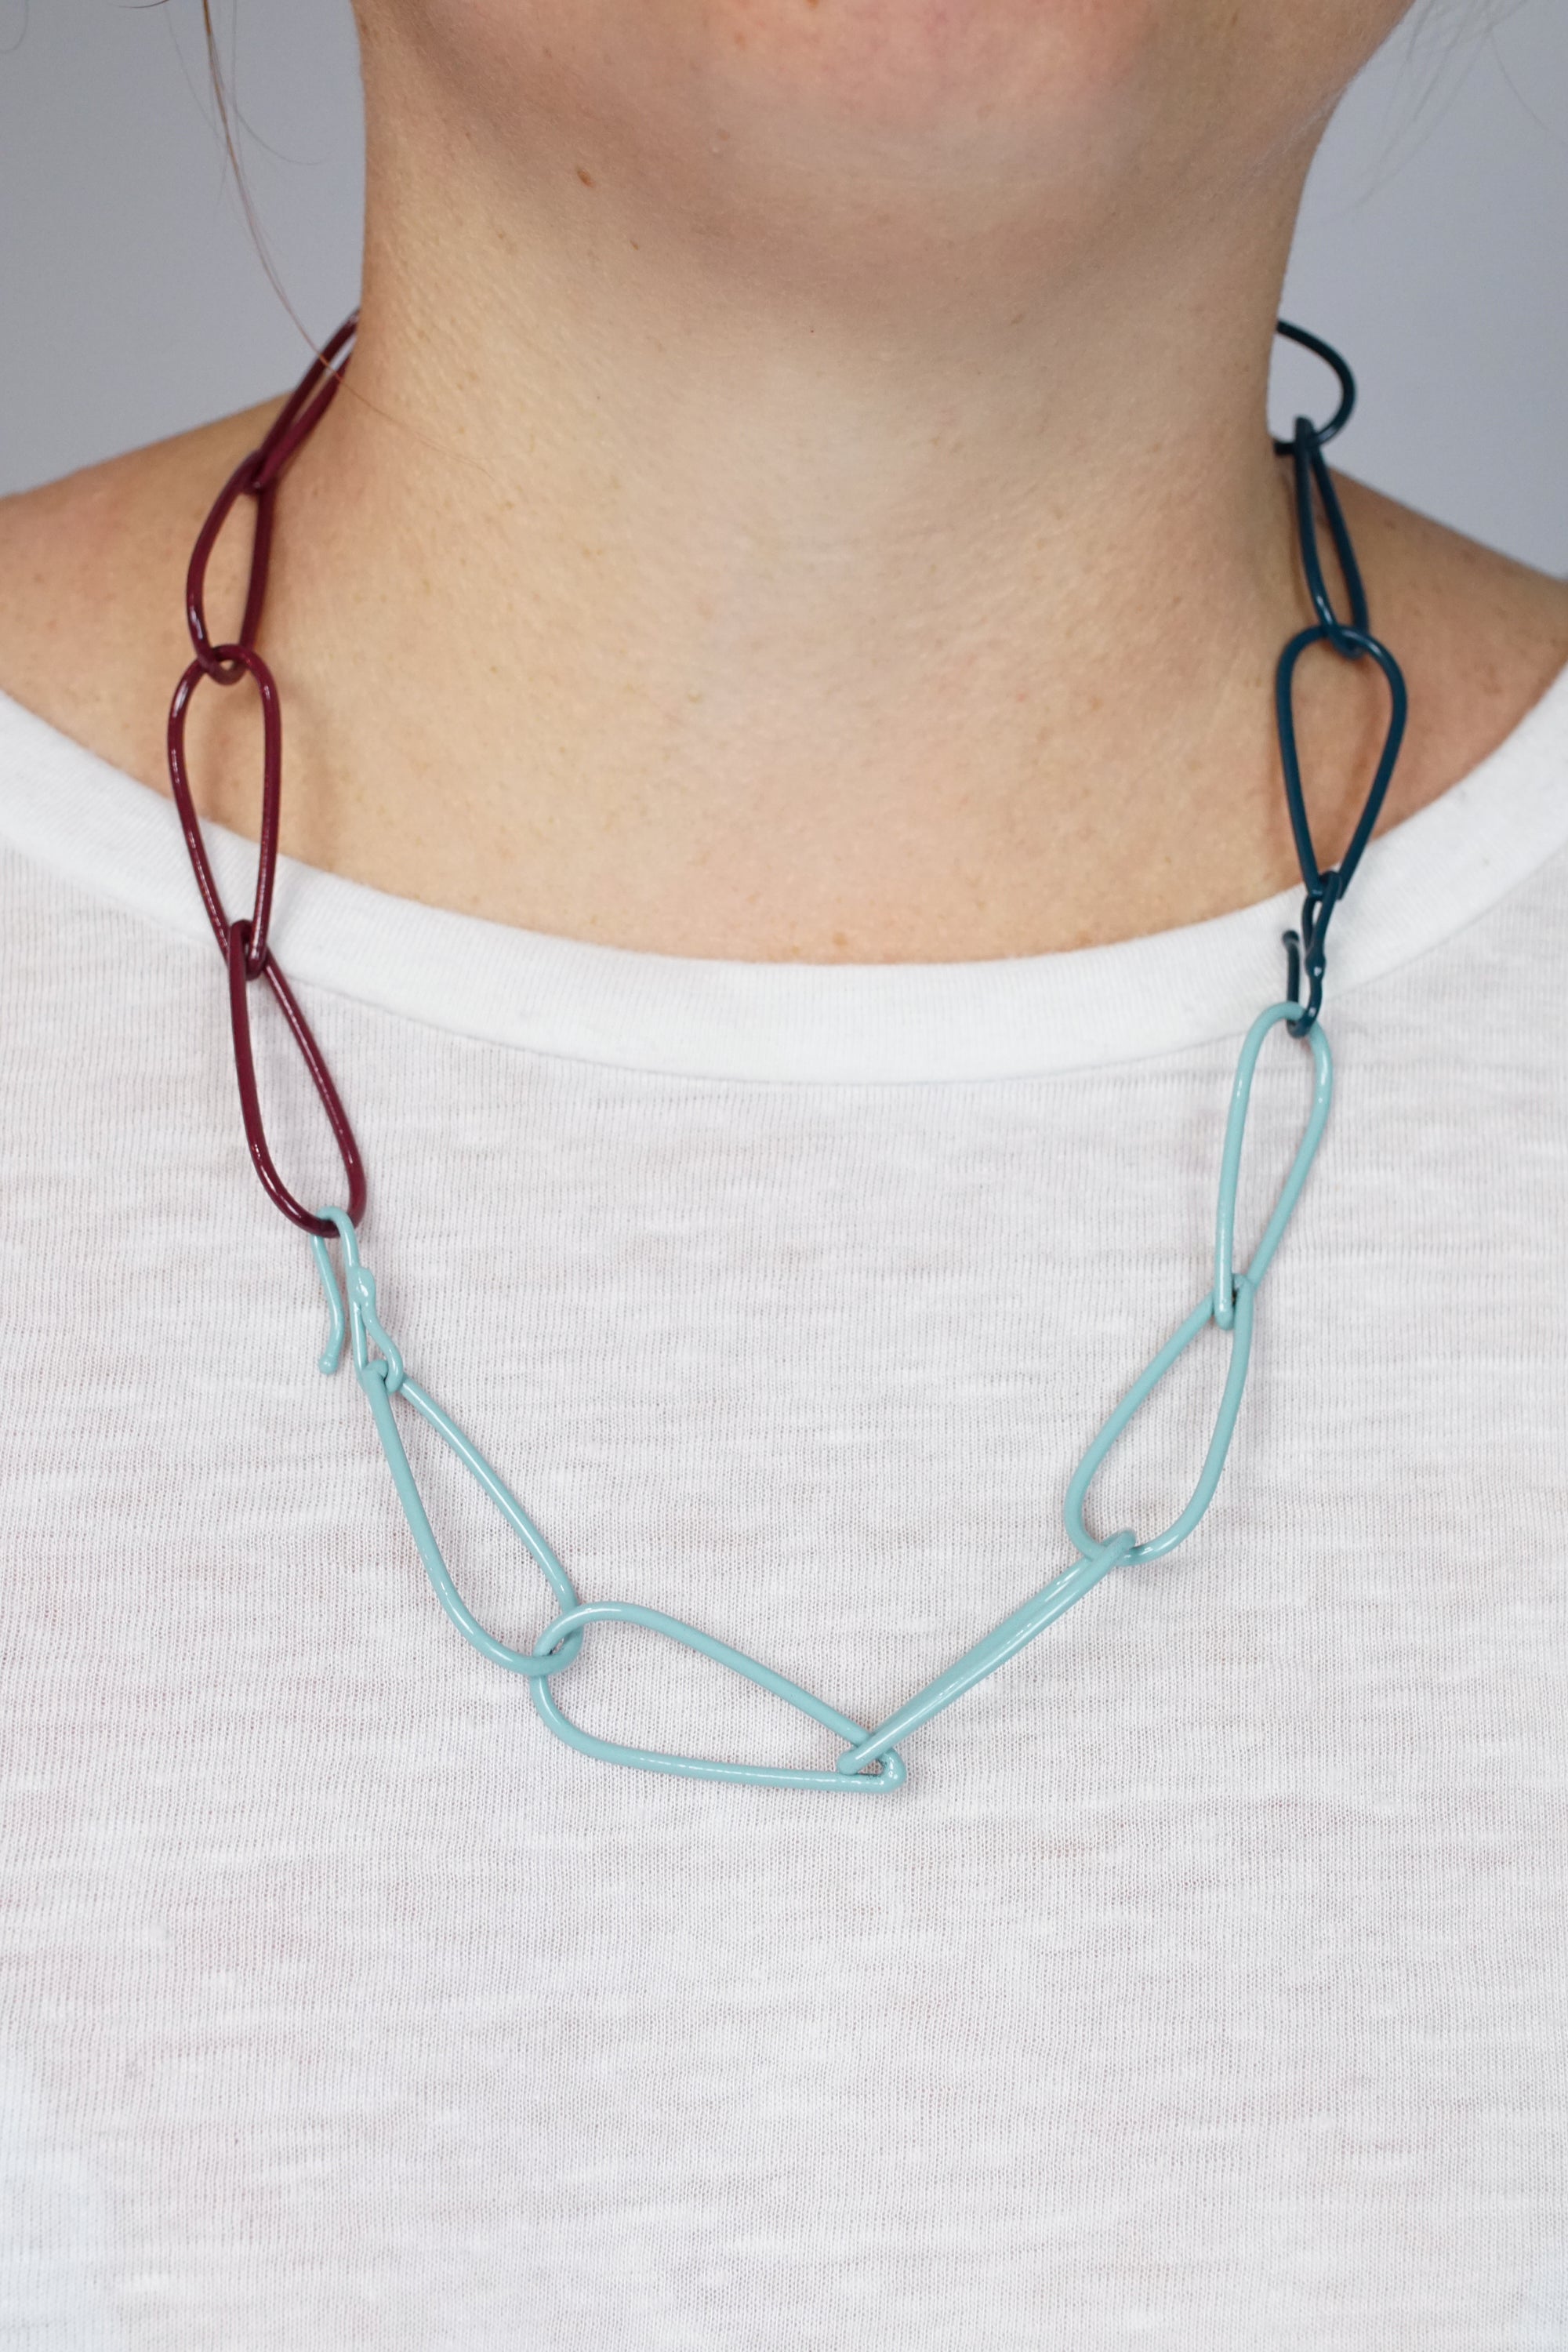 Modular Necklace in Lush Burgundy, Faded Teal, and Deep Ocean